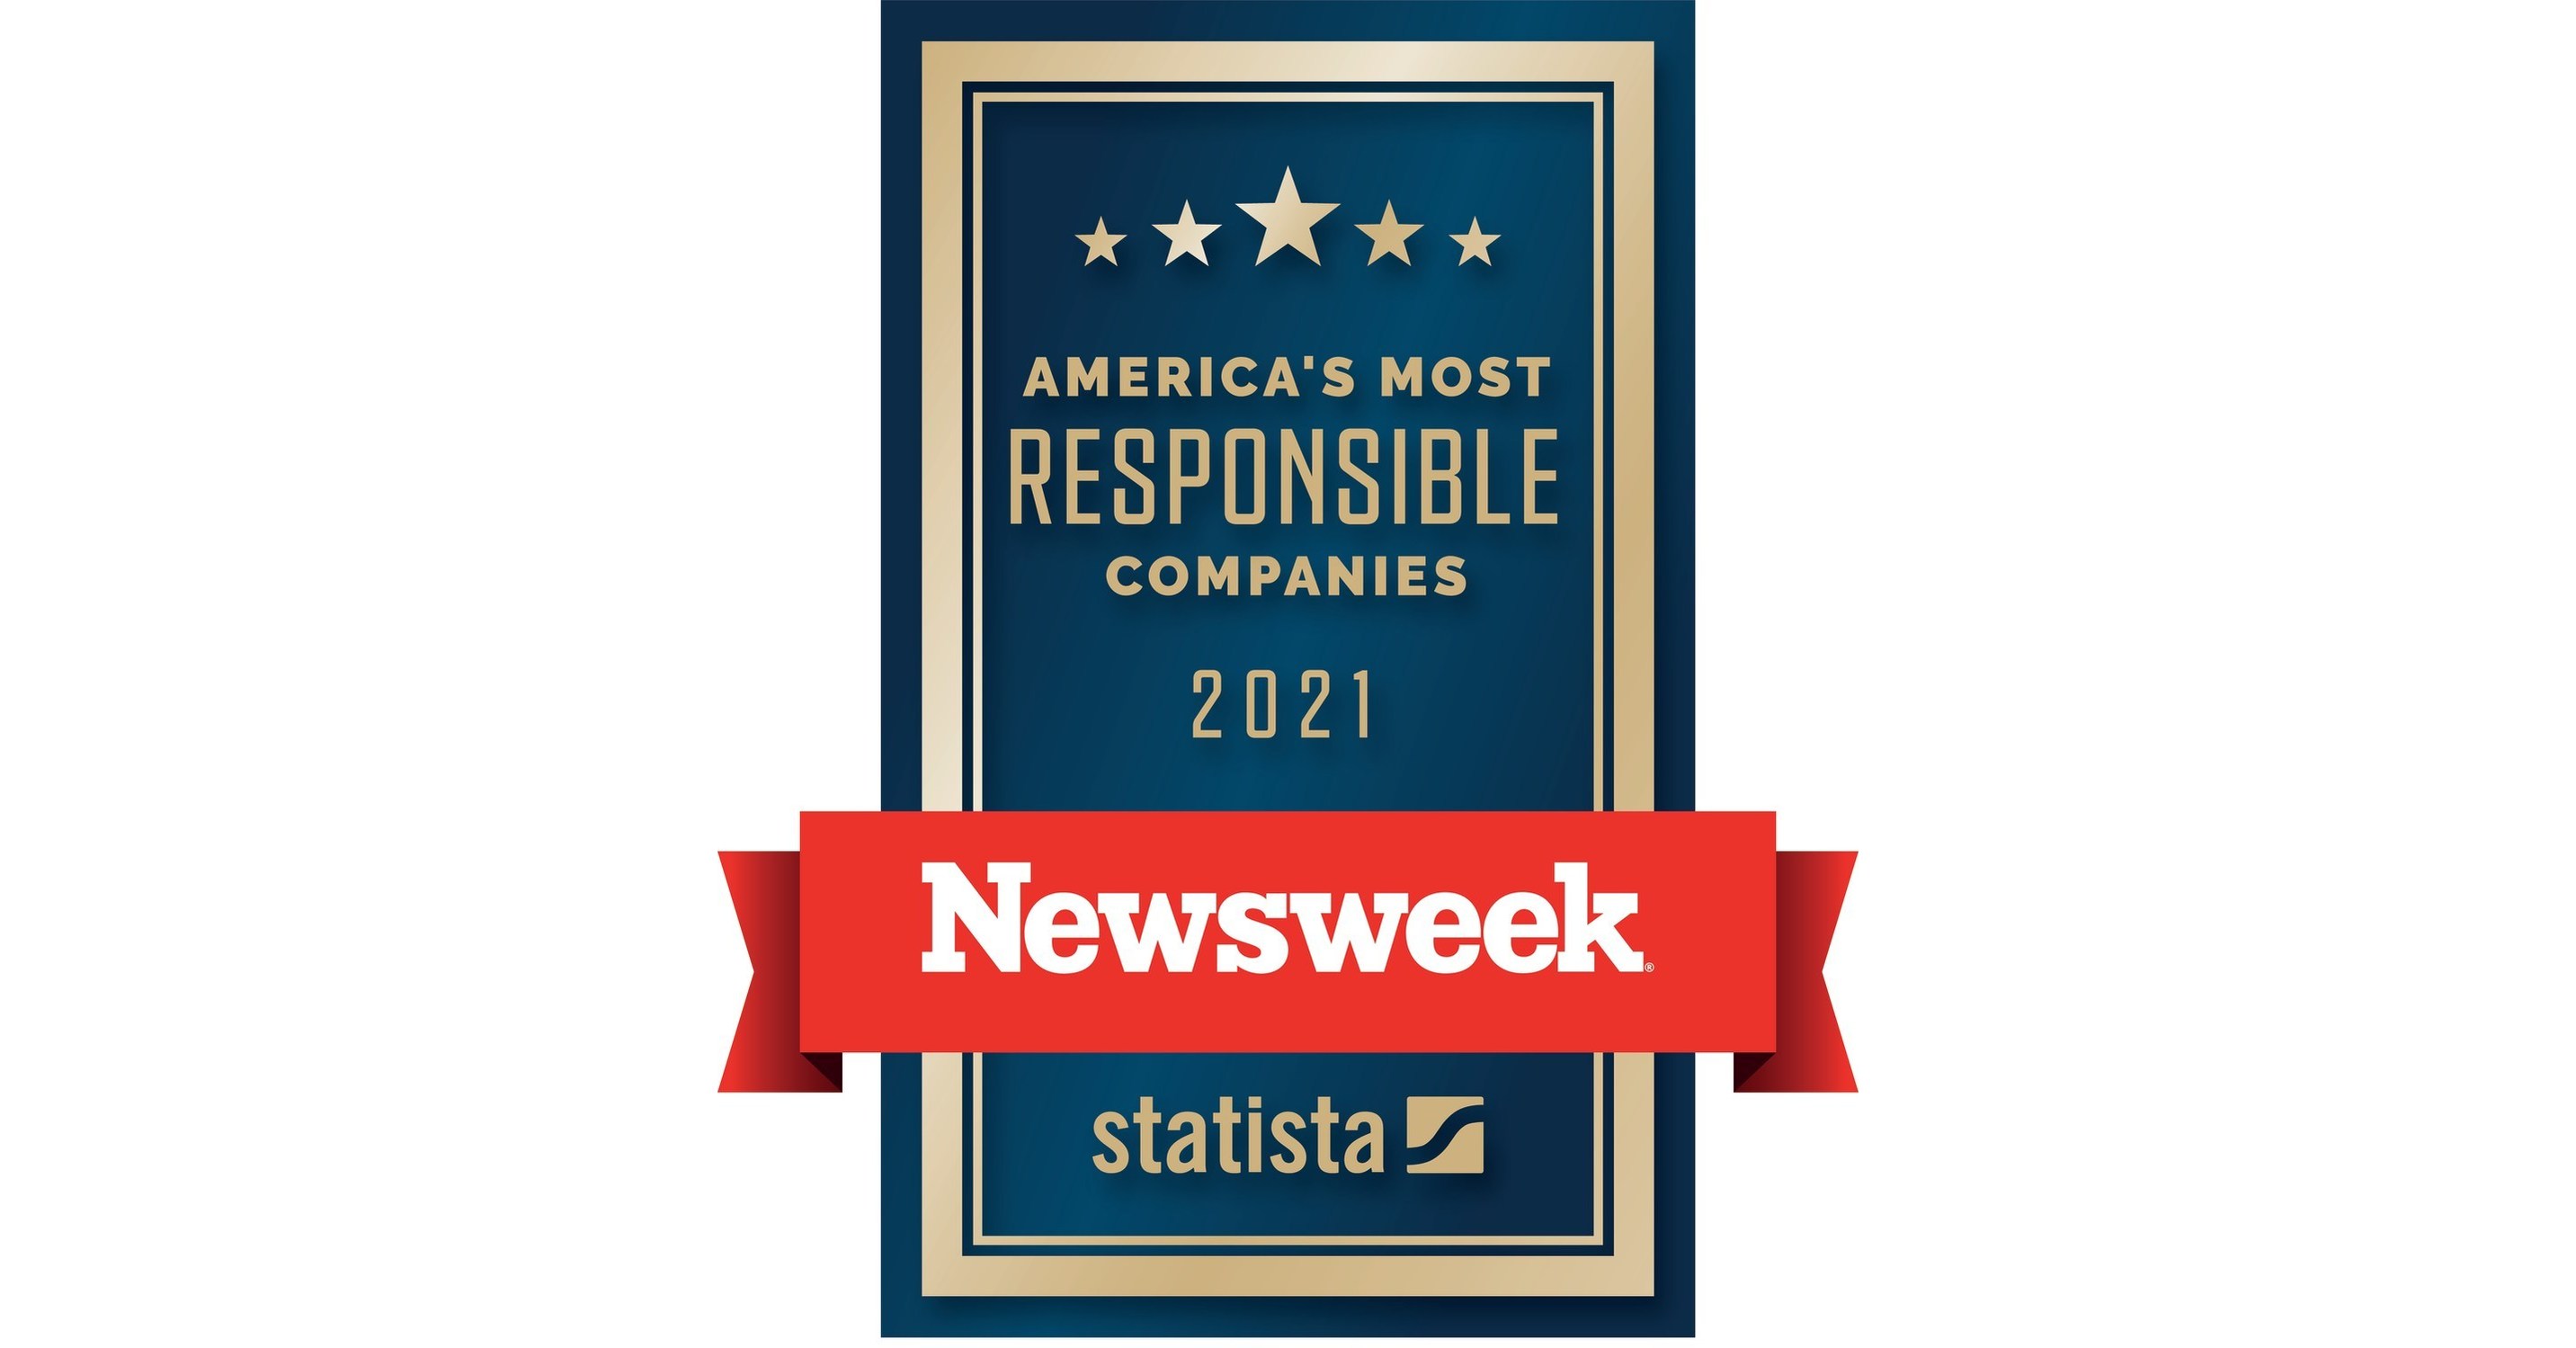 Timken Named One of America's Most Responsible Companies by Newsweek